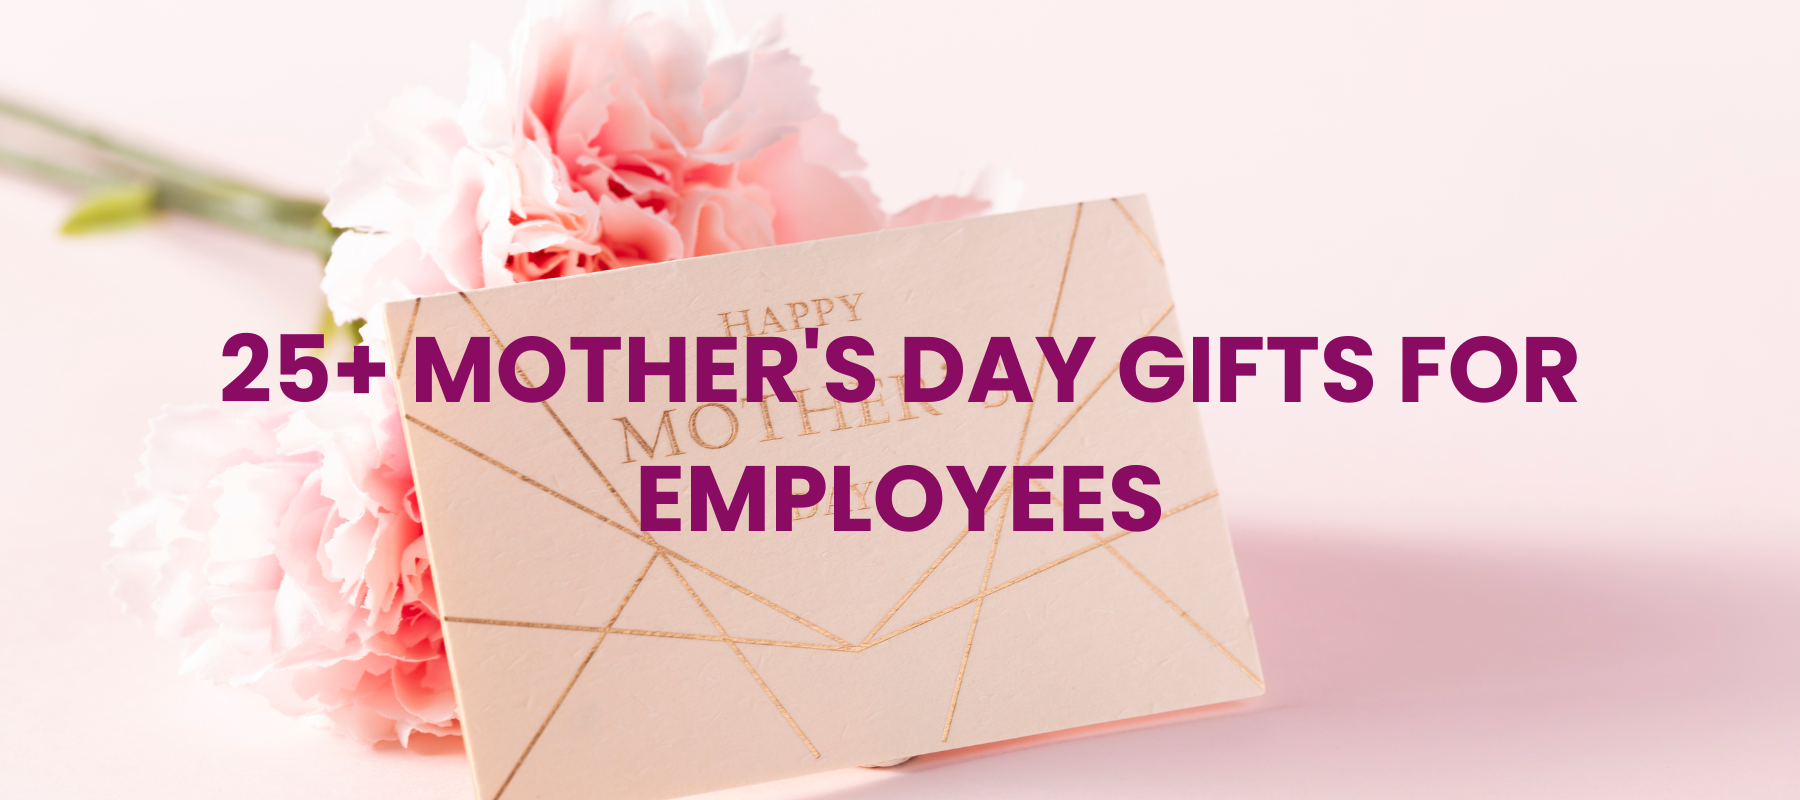 25+ Best Mother's Day Gifts For Employees